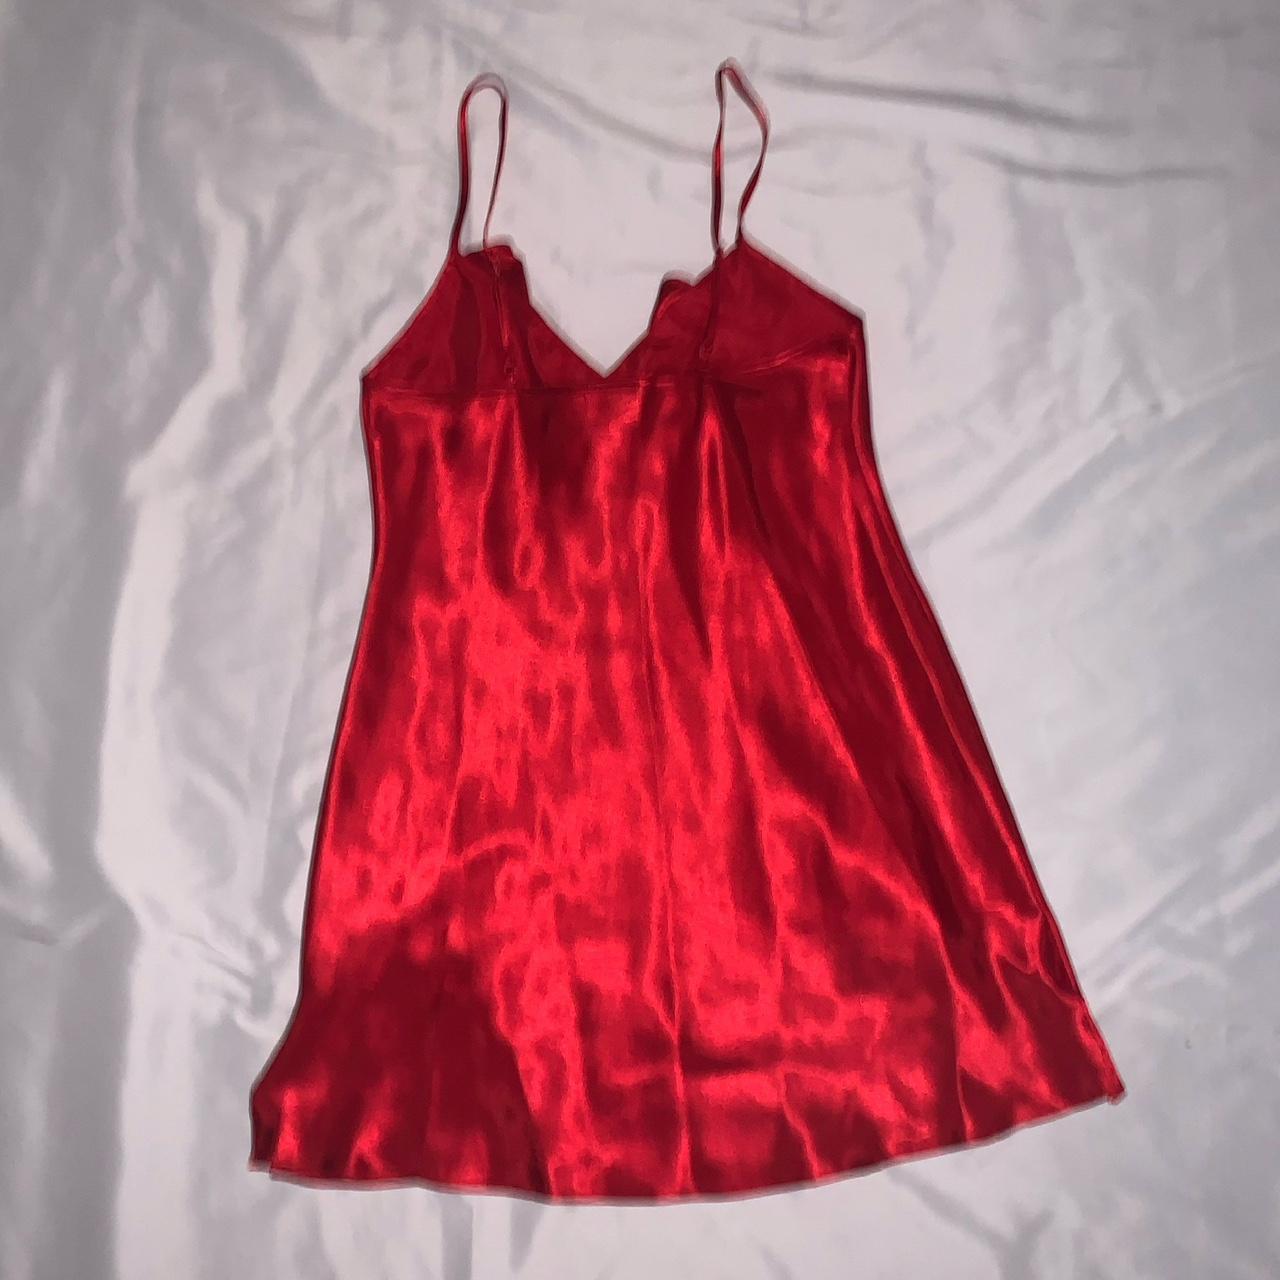 Frederick's of Hollywood Women's Red Dress (3)